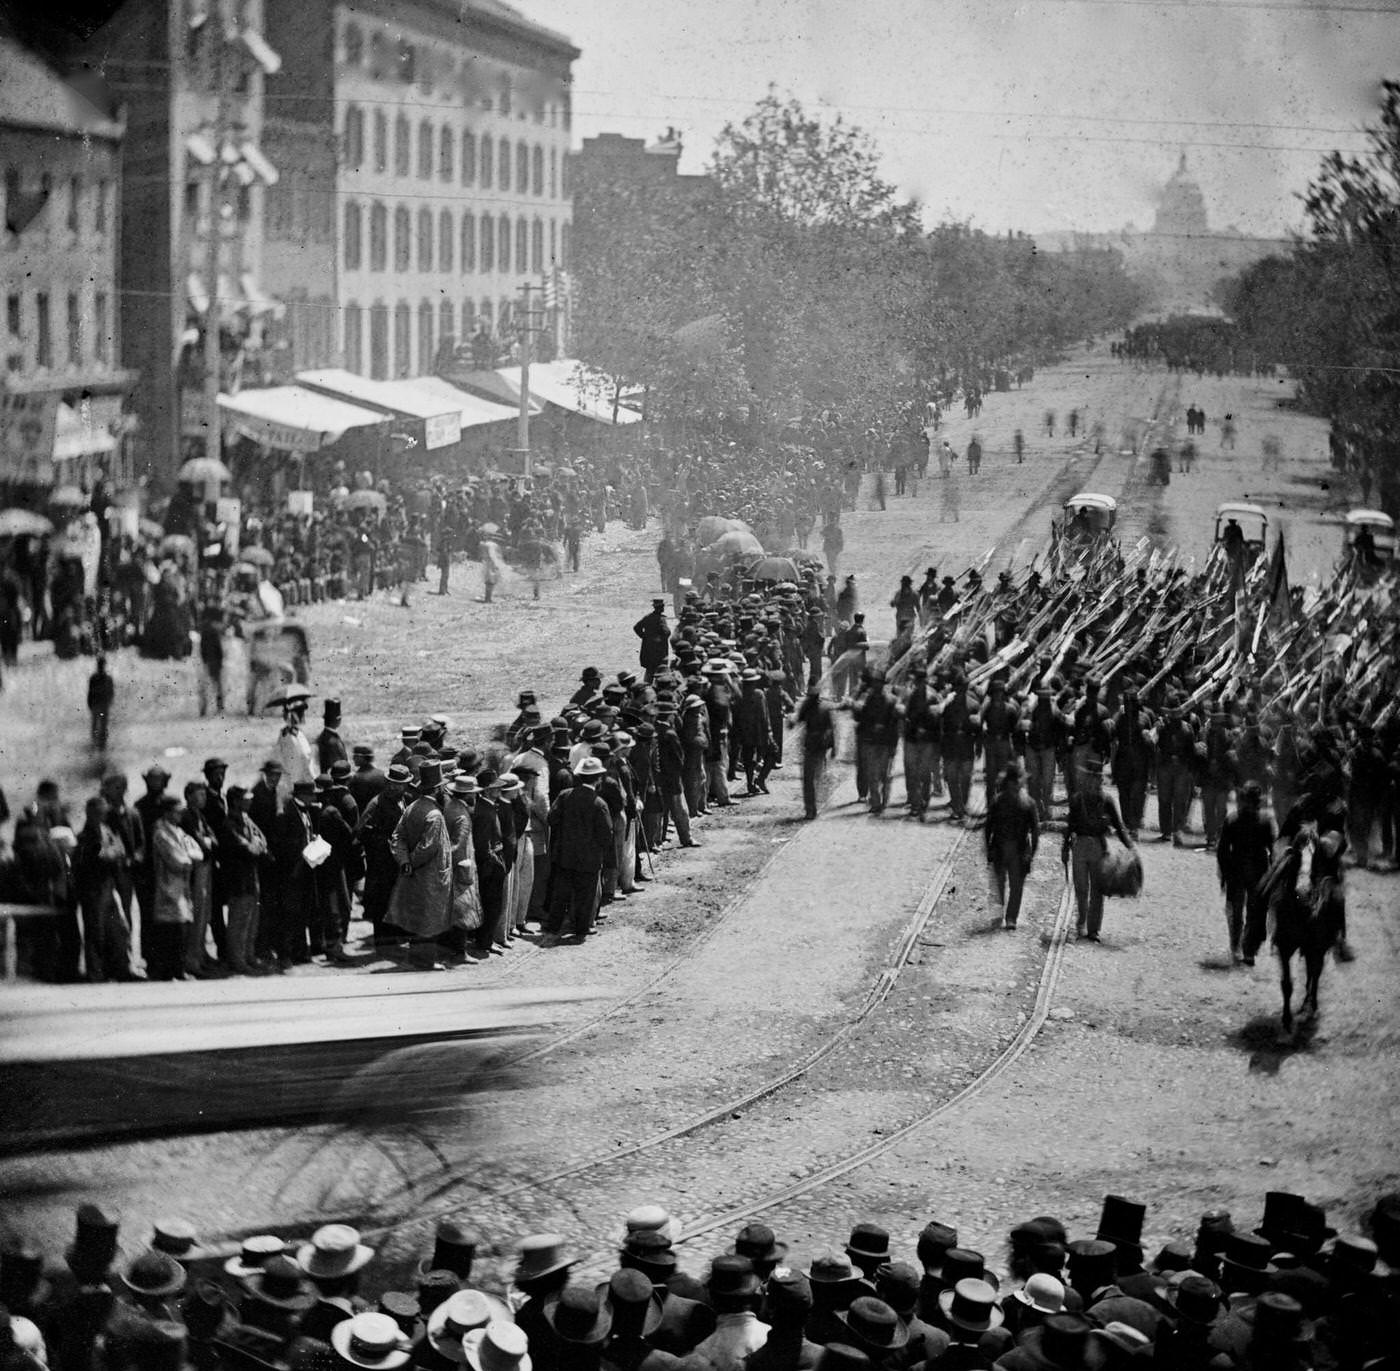 Infantry unit with fixed bayonets followed by ambulances passing on Pennsylvania Avenue near the Treasury, during the "grand review" of the Union Army, Washington, D.C., 1865